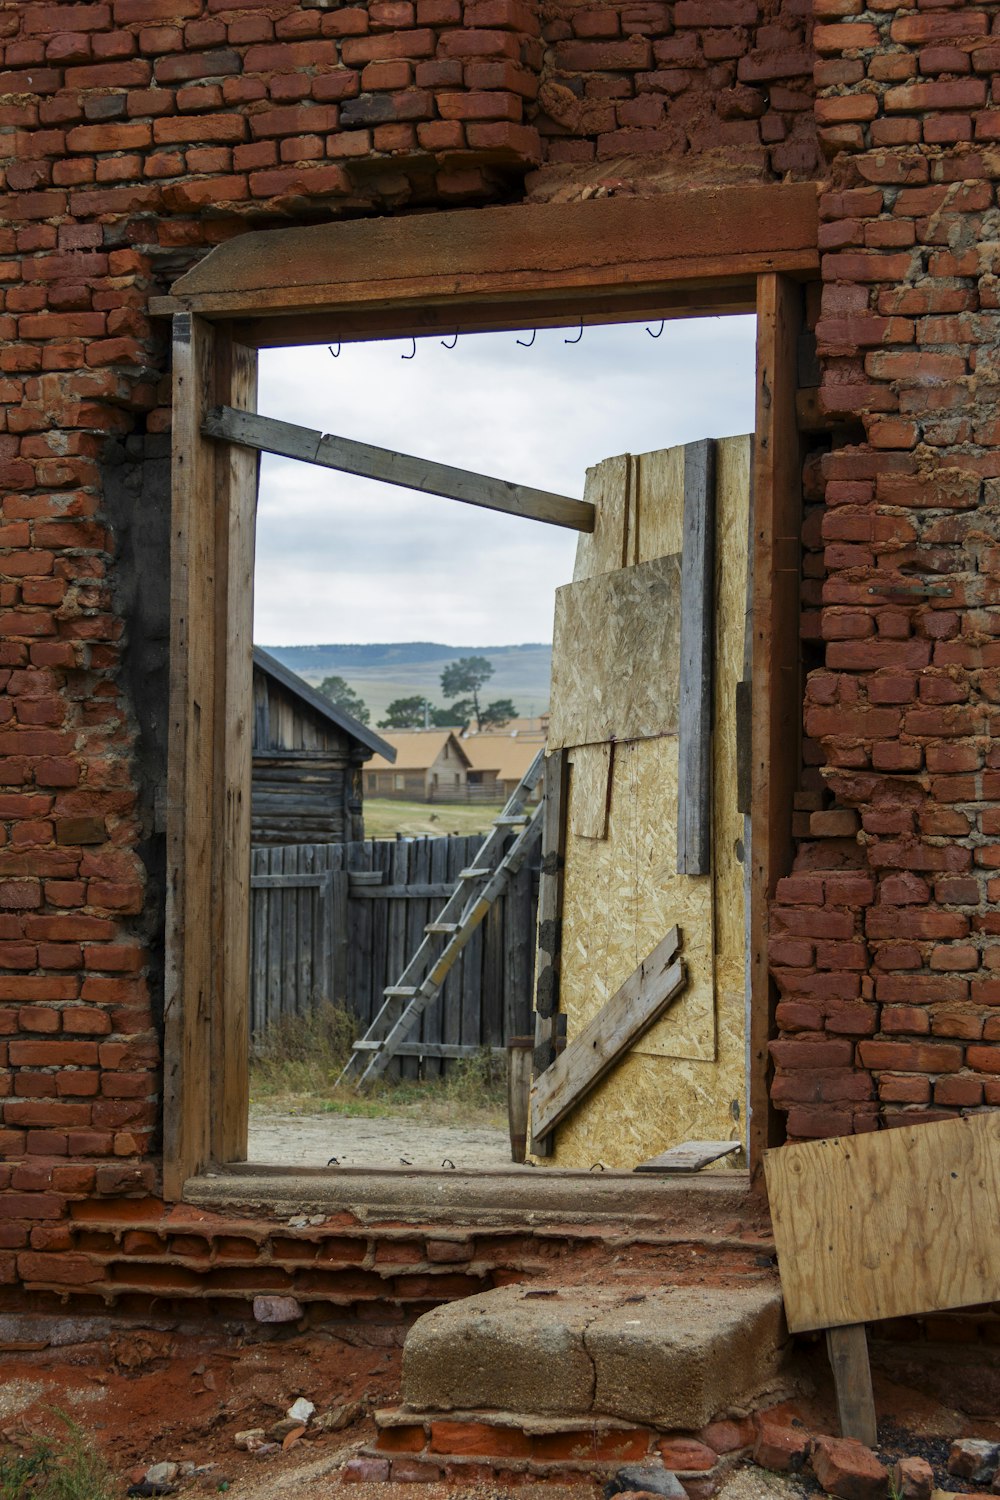 a window in a brick wall with a wooden frame